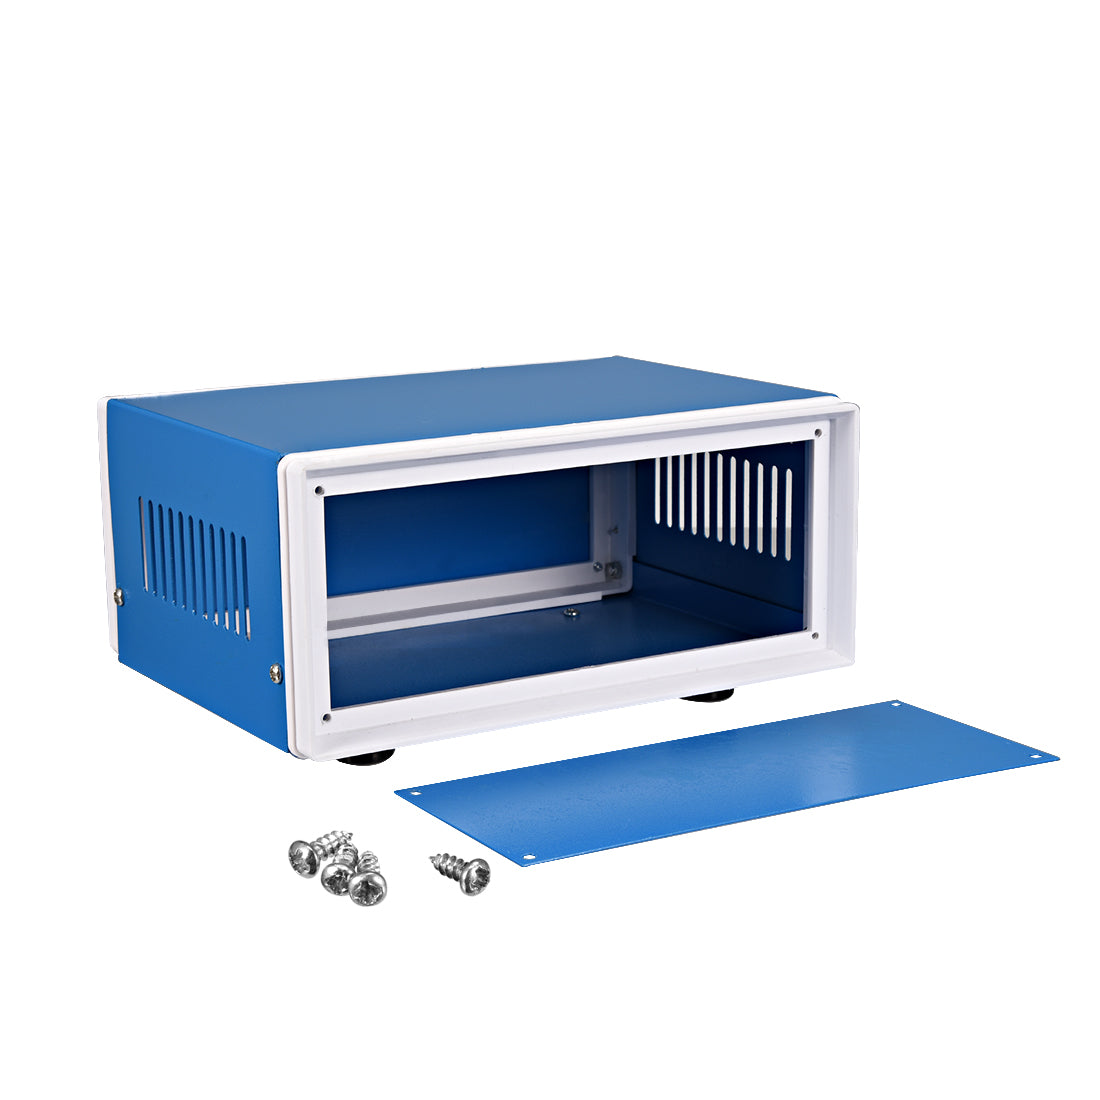 uxcell Uxcell Metal Blue Project Junction Box Enclosure Case 170 x 130 x 80mm/6.69 x 5.12 x 3.15inch